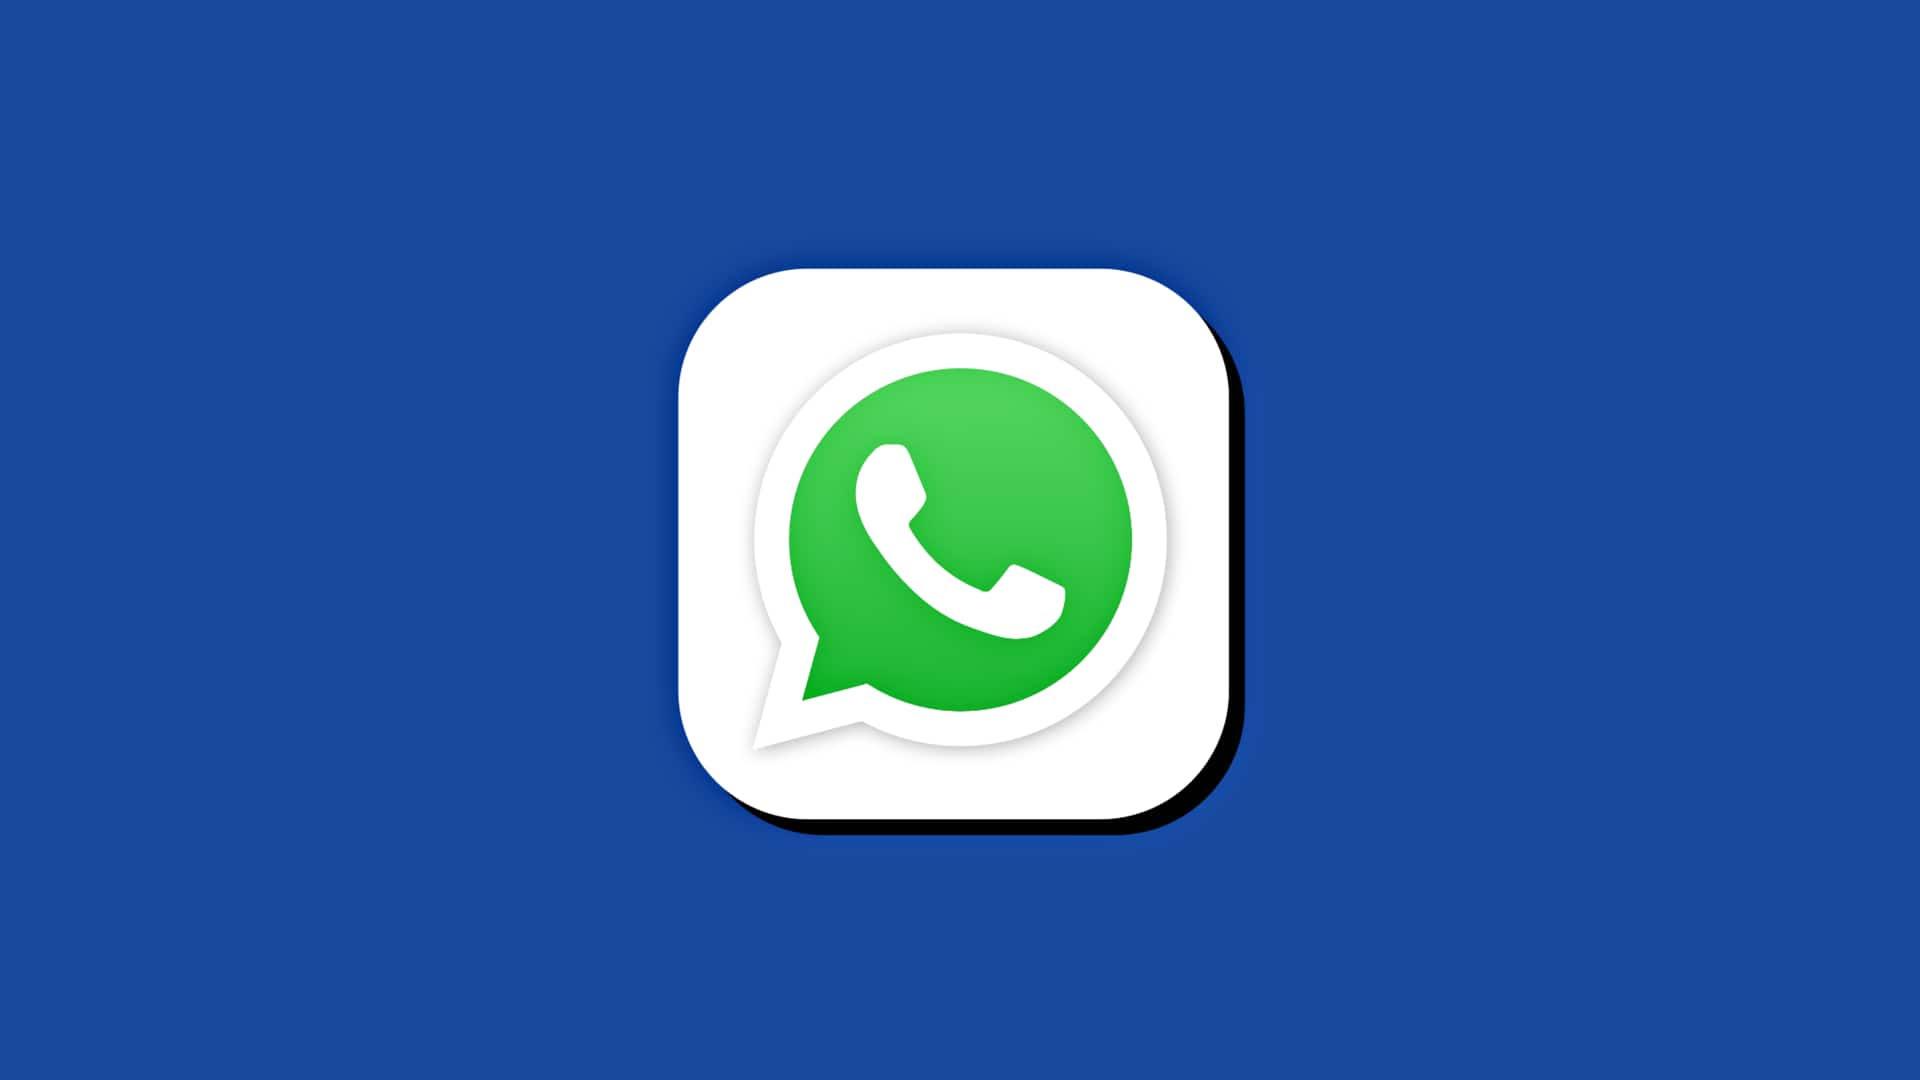 WhatsApp feature drop! New abilities coming to iOS, Android, Windows